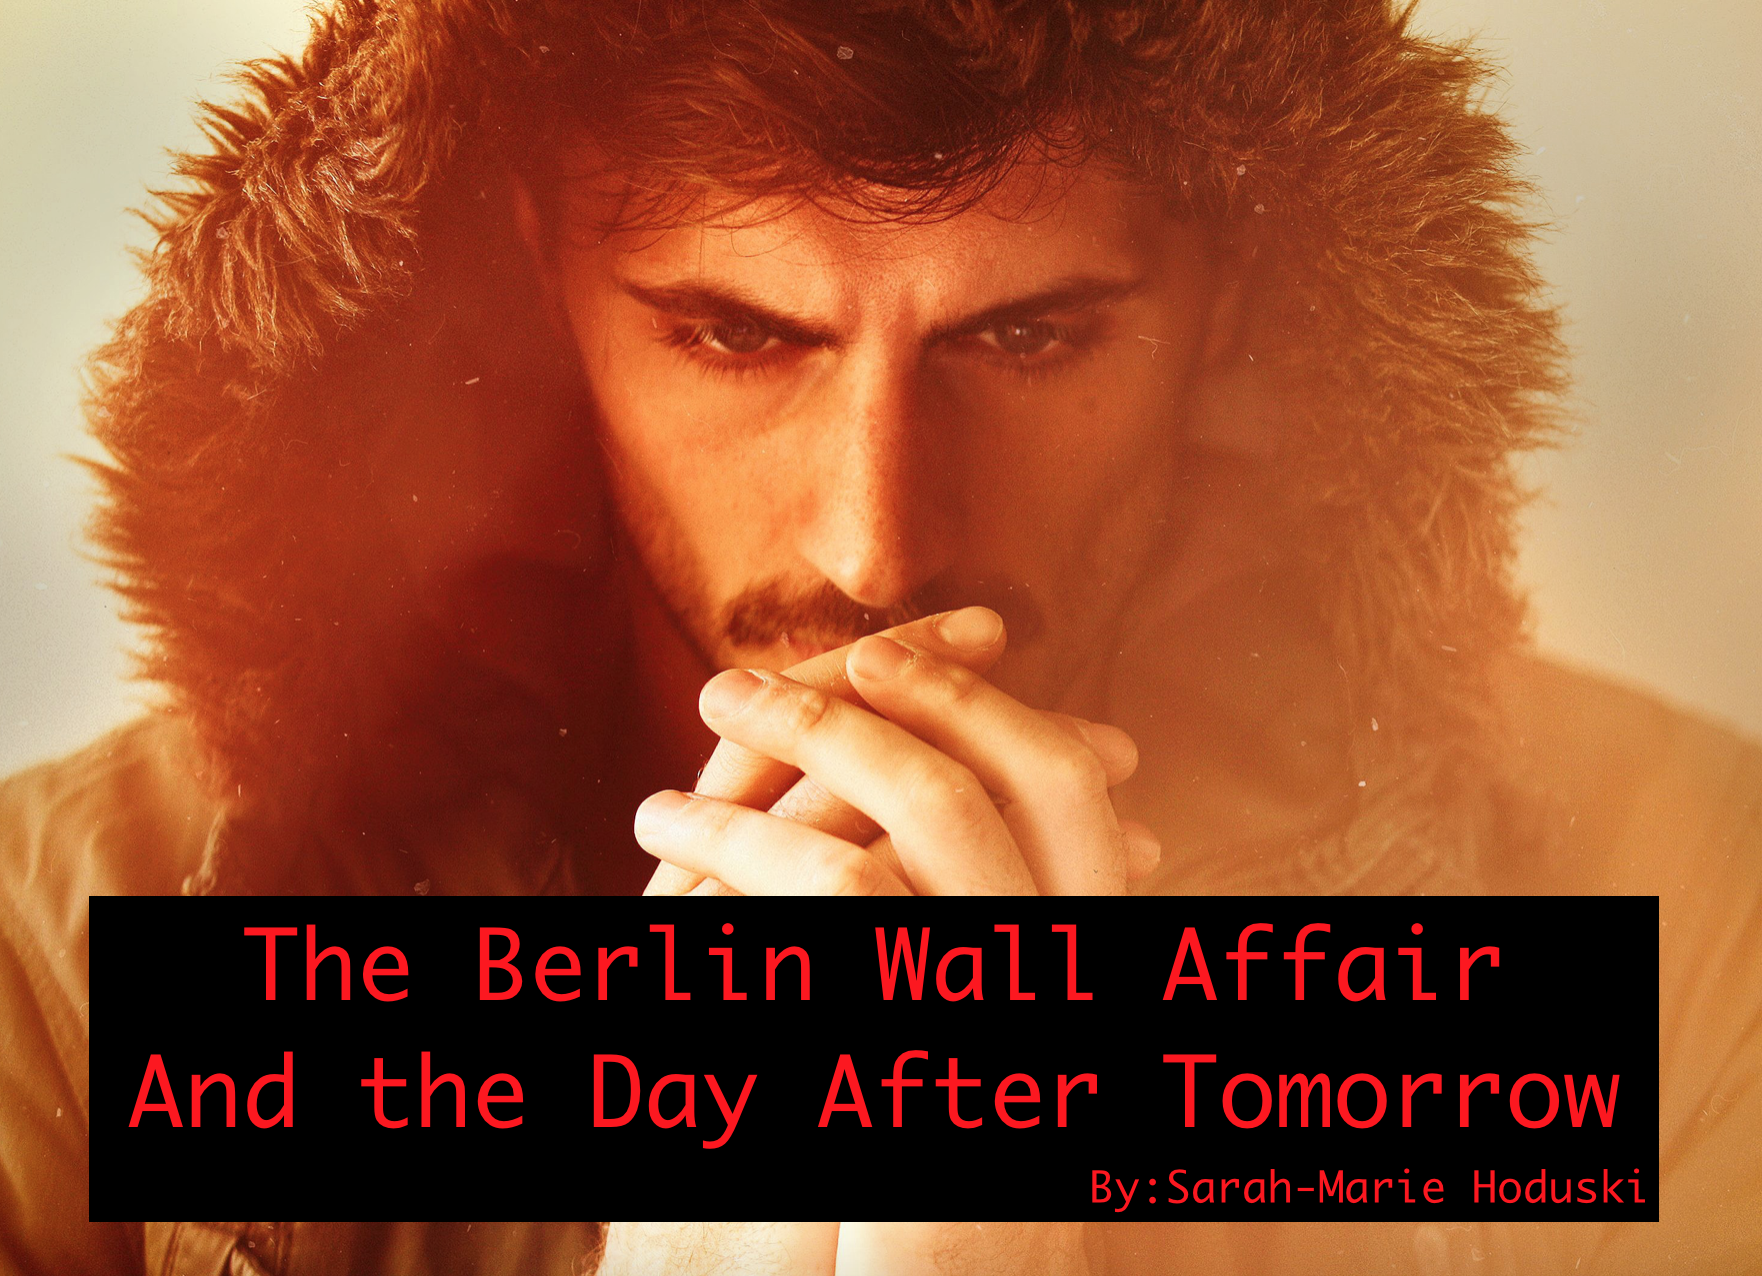 Featured image for “The Berlin Wall Affair And the Day After Tomorrow”